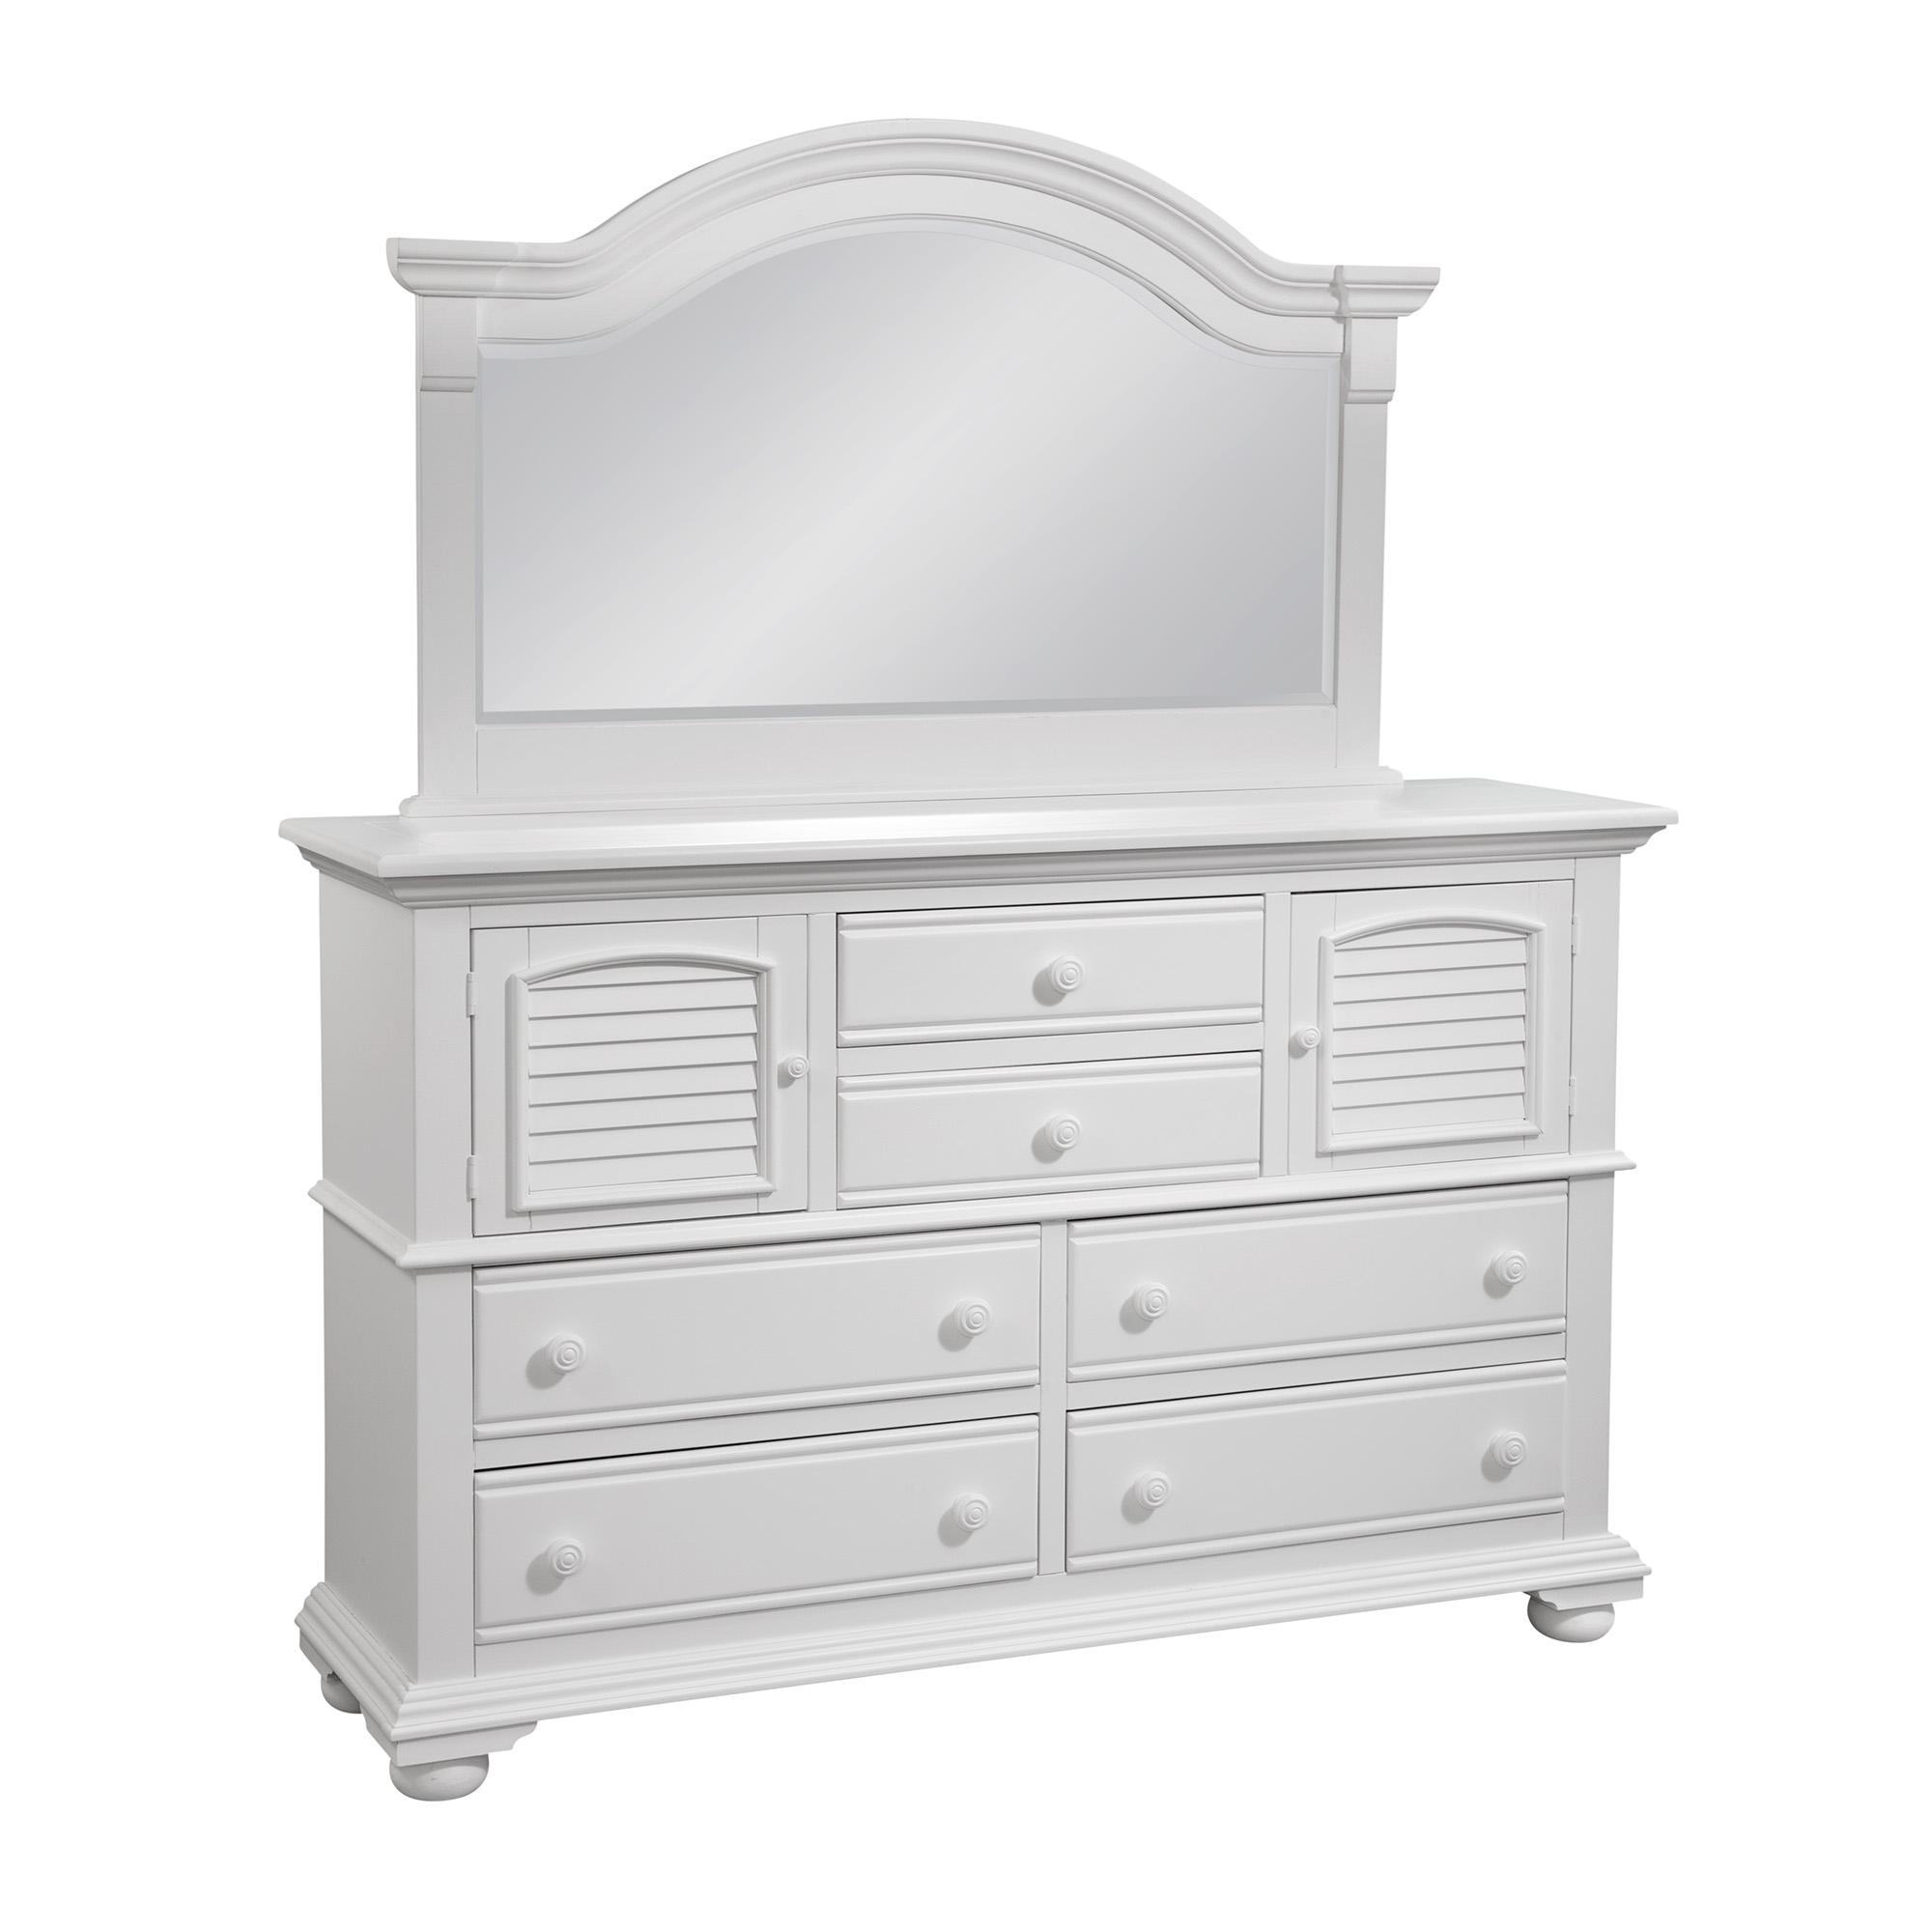 Classic, Traditional, Cottage Dresser With Mirror COTTAGE 6510-HDLM 6510-HDLM in White 